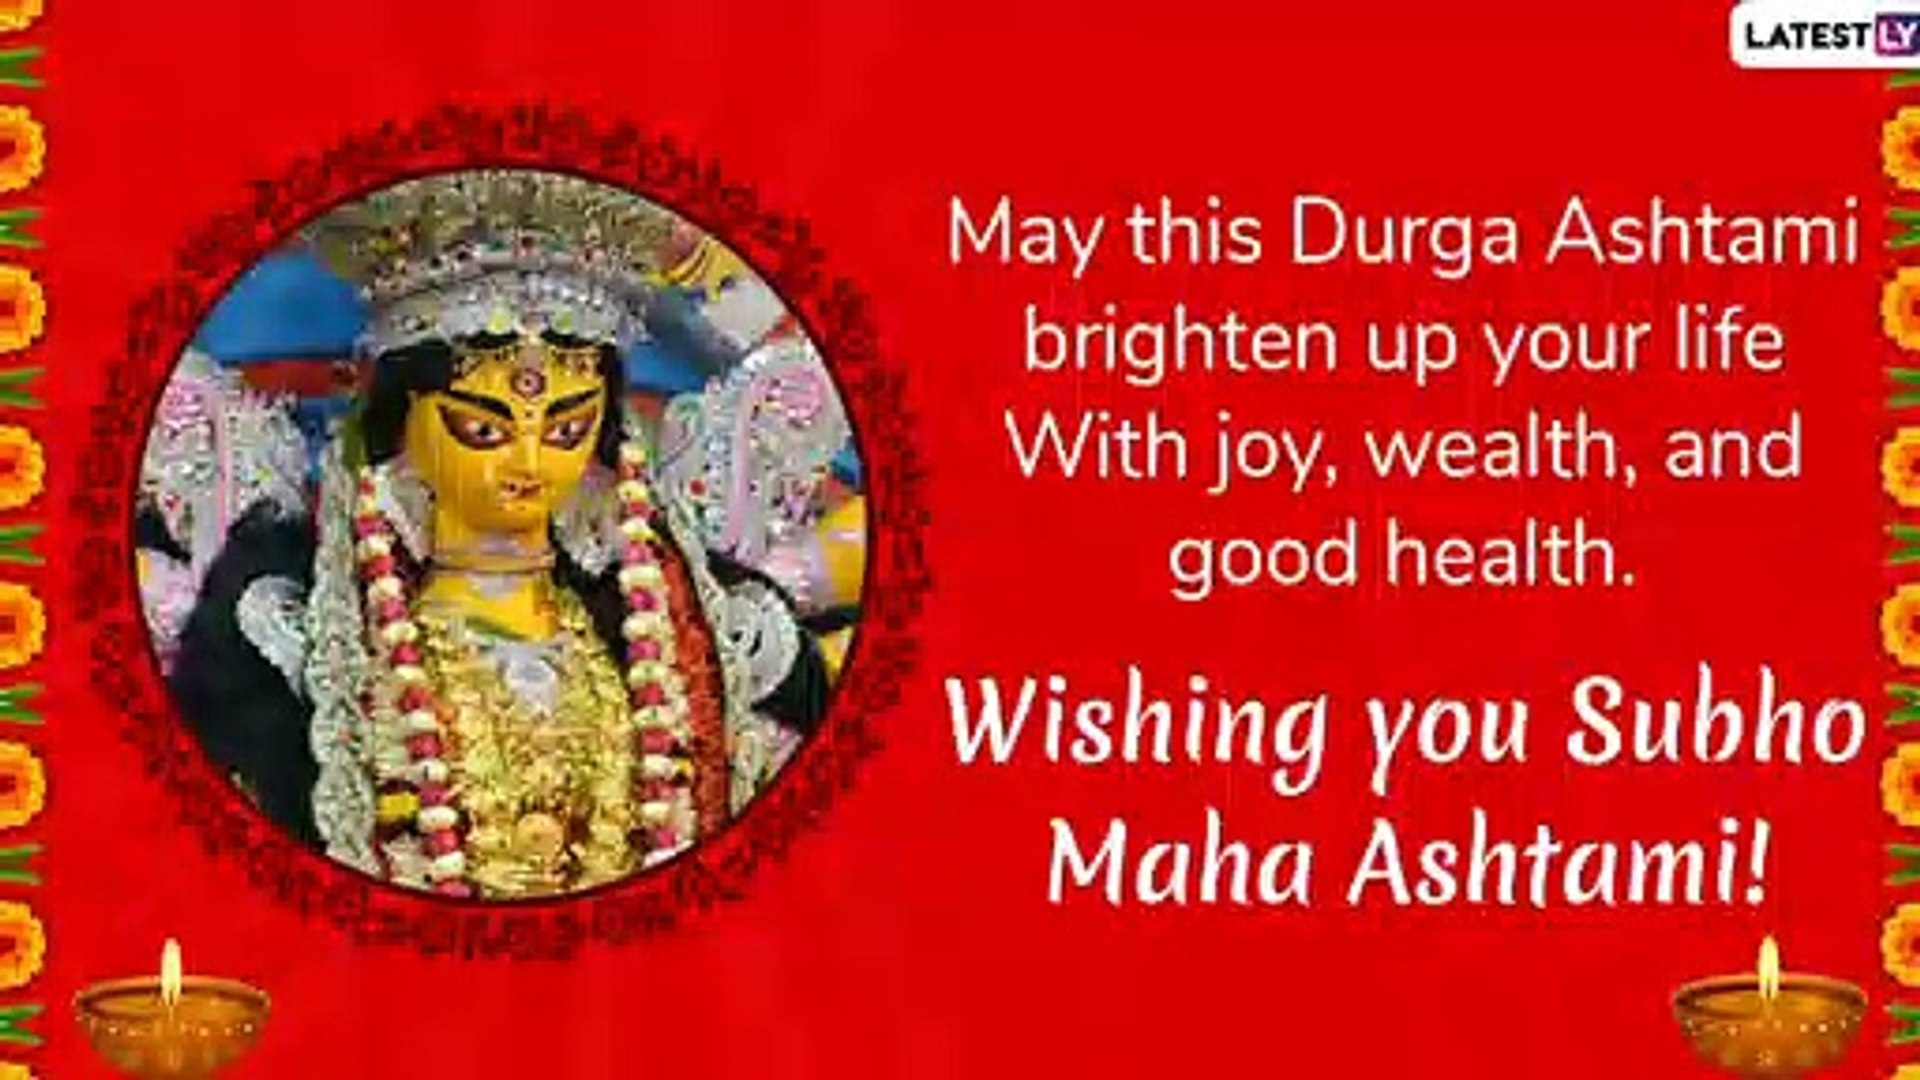 Subho Maha Ashtami 2019 Wishes: Durgashtami Messages And Greetings to Send  During Durga Puja - video Dailymotion